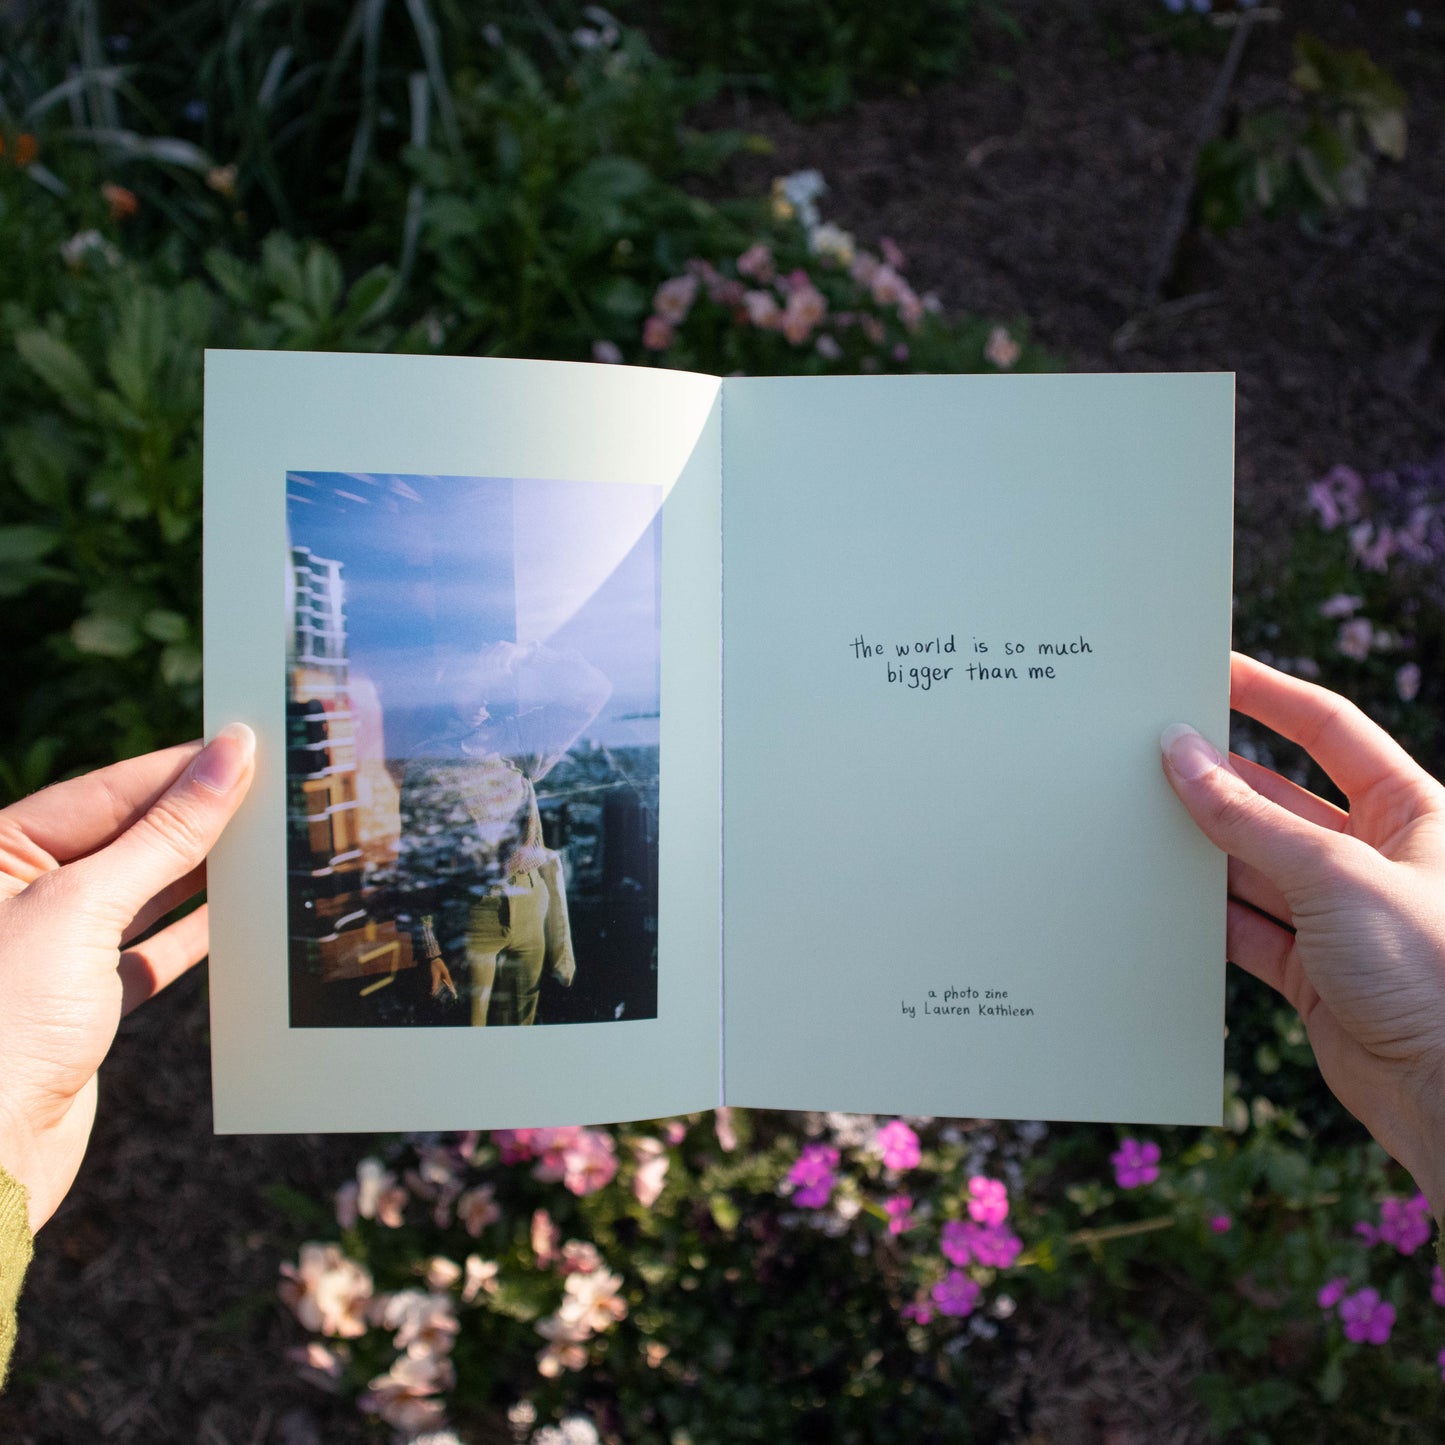 the world is so much bigger than me - photo zine